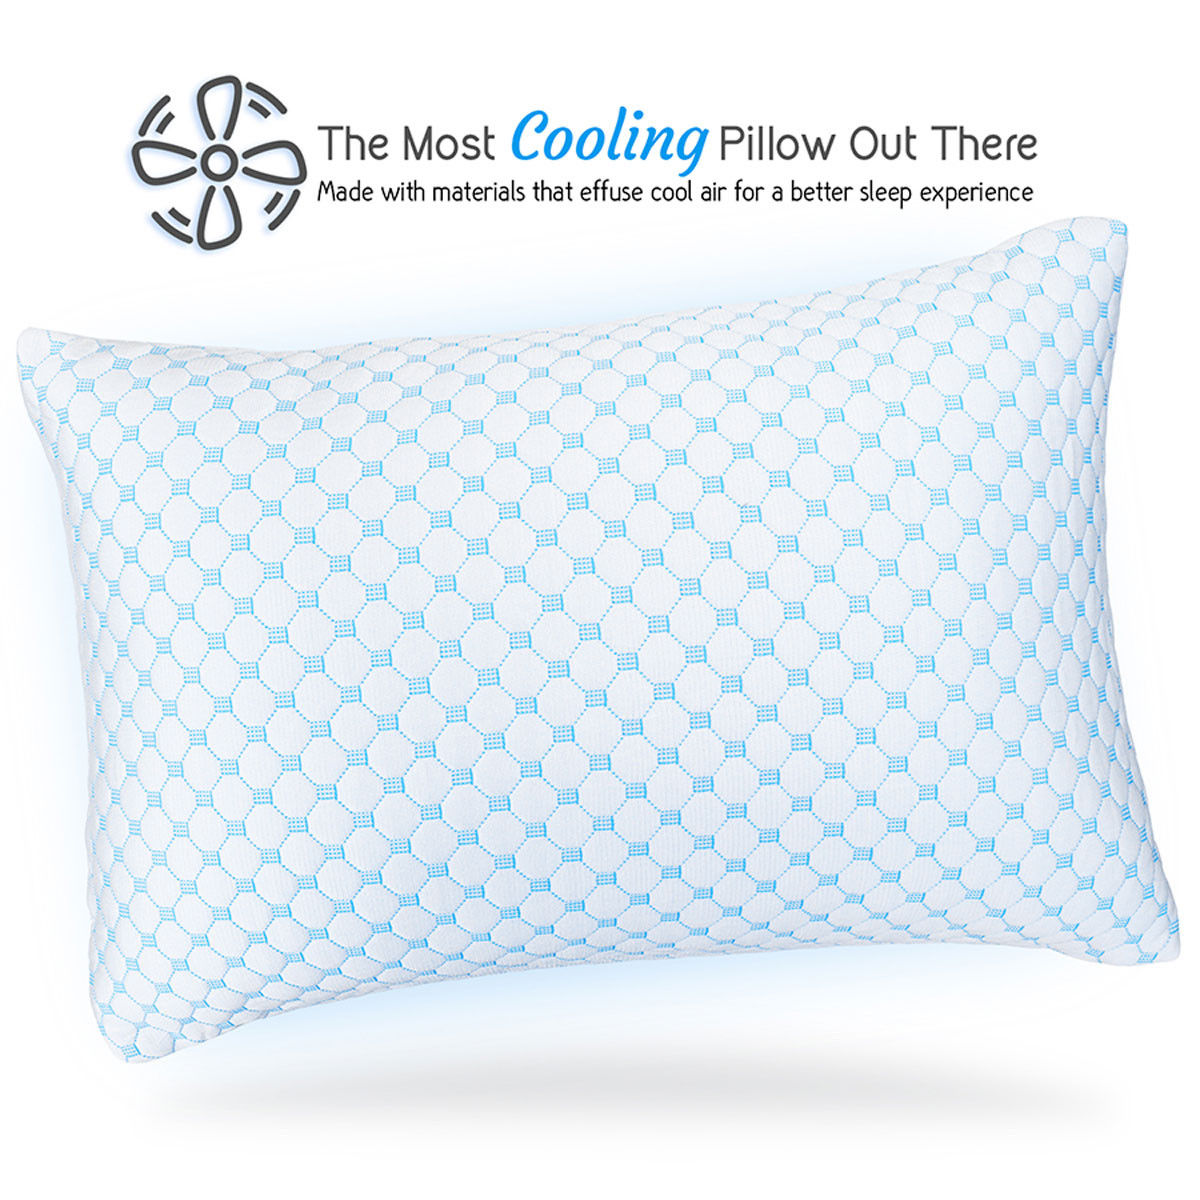 Can Clara Clark pillow be reversed for bamboo cooling?